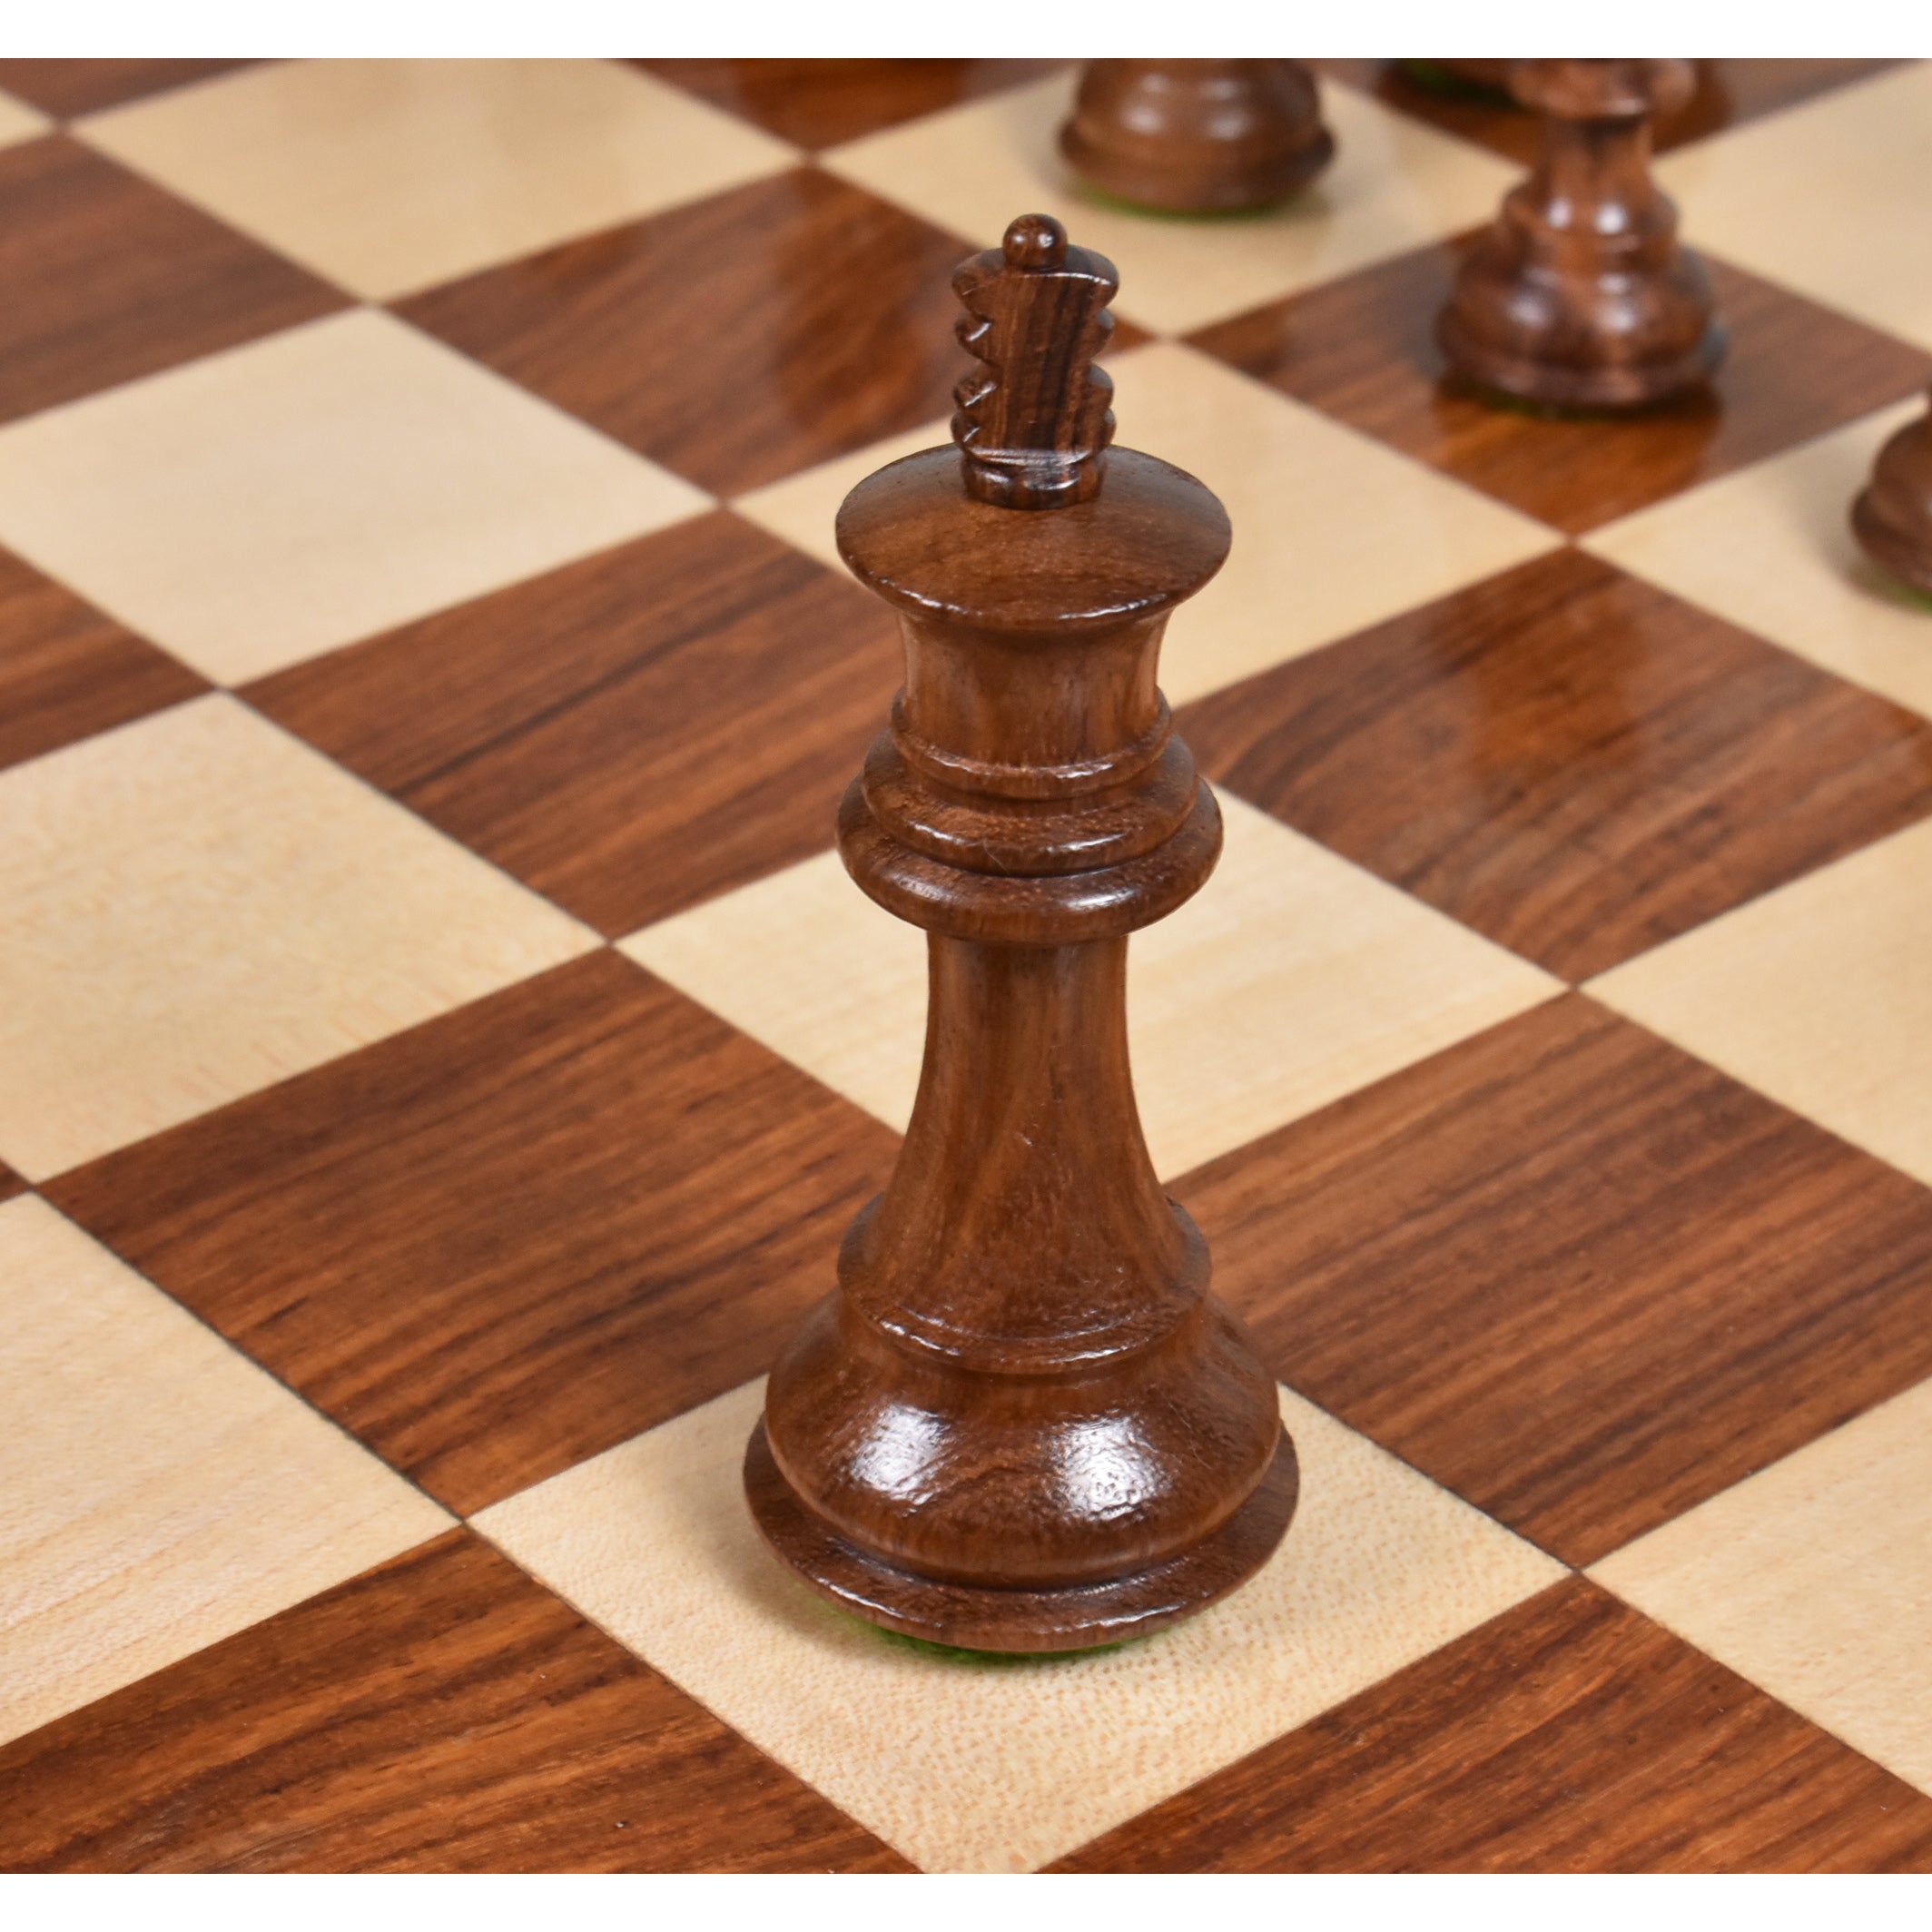 New Exclusive Staunton Chess Set Ebonized & Boxwood Pieces with The Queen's  Gambit Chess Board - 3.5 King - The Chess Store